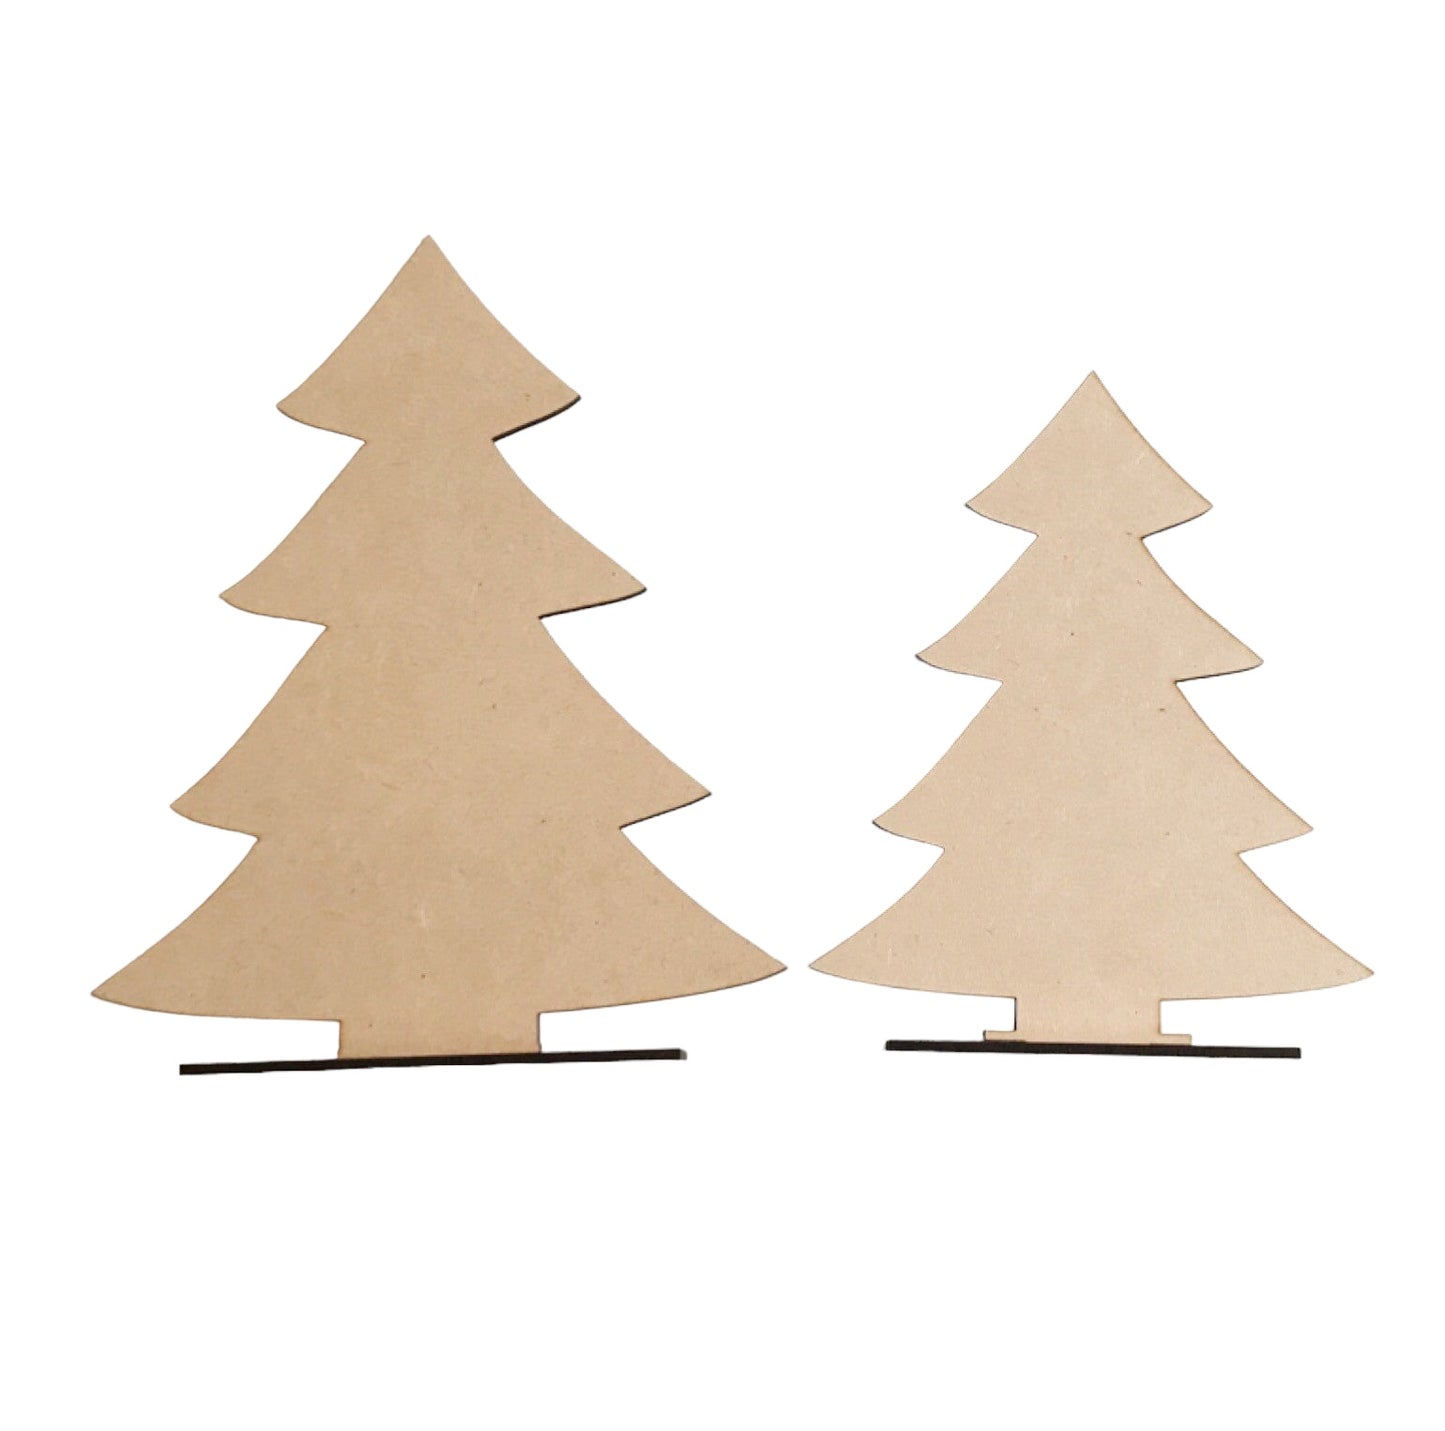 Tree Trees x2 Standing Raw MDF Wooden DIY Craft - The Renmy Store Homewares & Gifts 